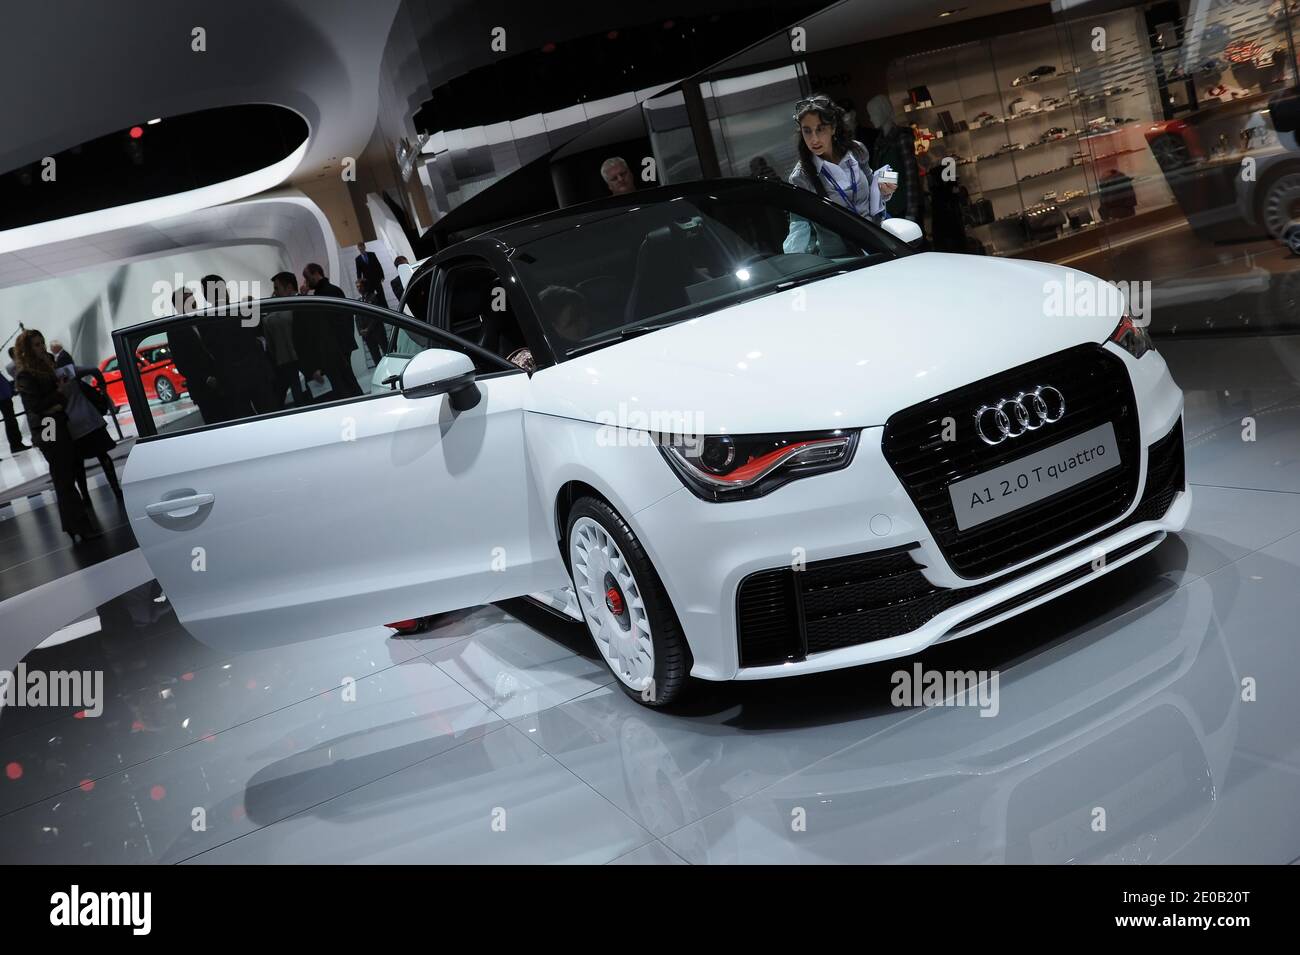 Audi A1 2.0 T quattro on display at the 82nd International Motor Show and  Accessories of Geneva, Switzerland on March 7, 2012. Photo by  Loona/ABACAPRESS.COM Stock Photo - Alamy